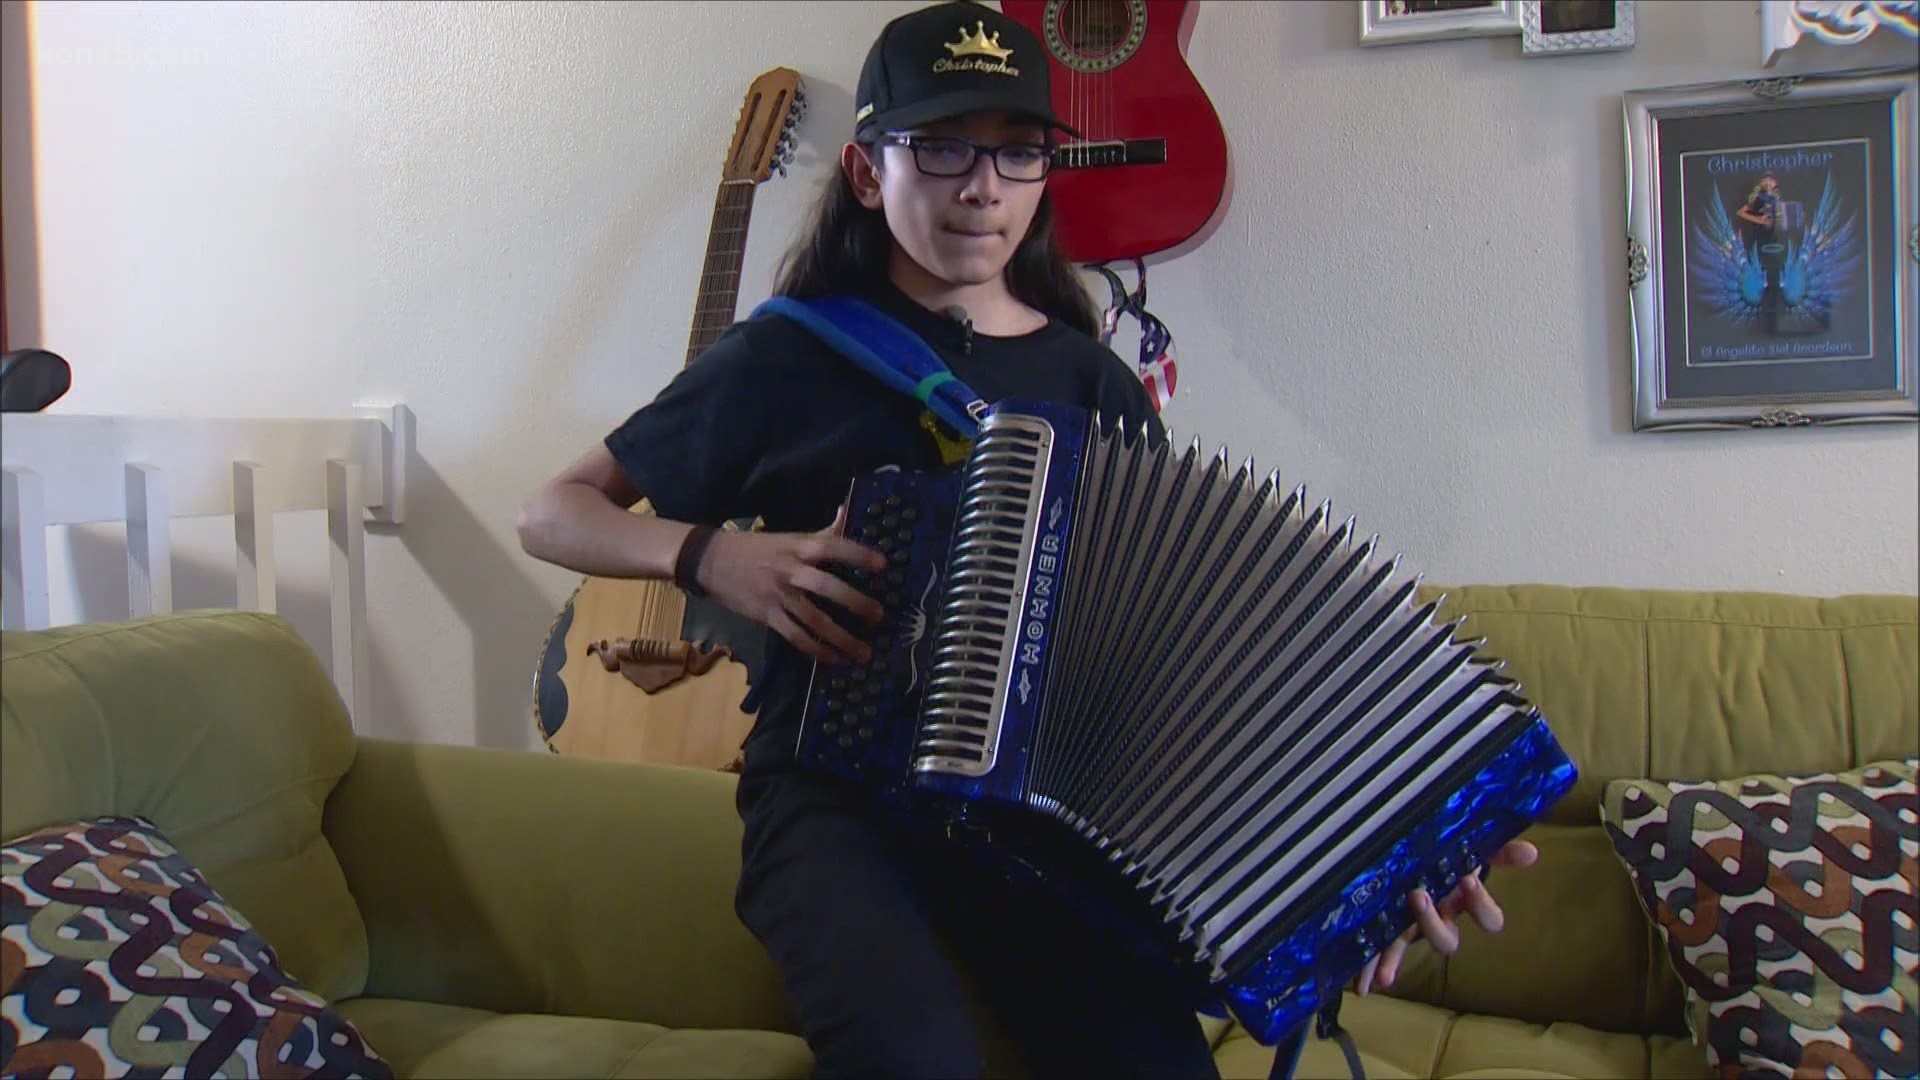 Christopher Ramirez, 14, was so determined to learn the accordion that he drew the keys on a piece of paper.